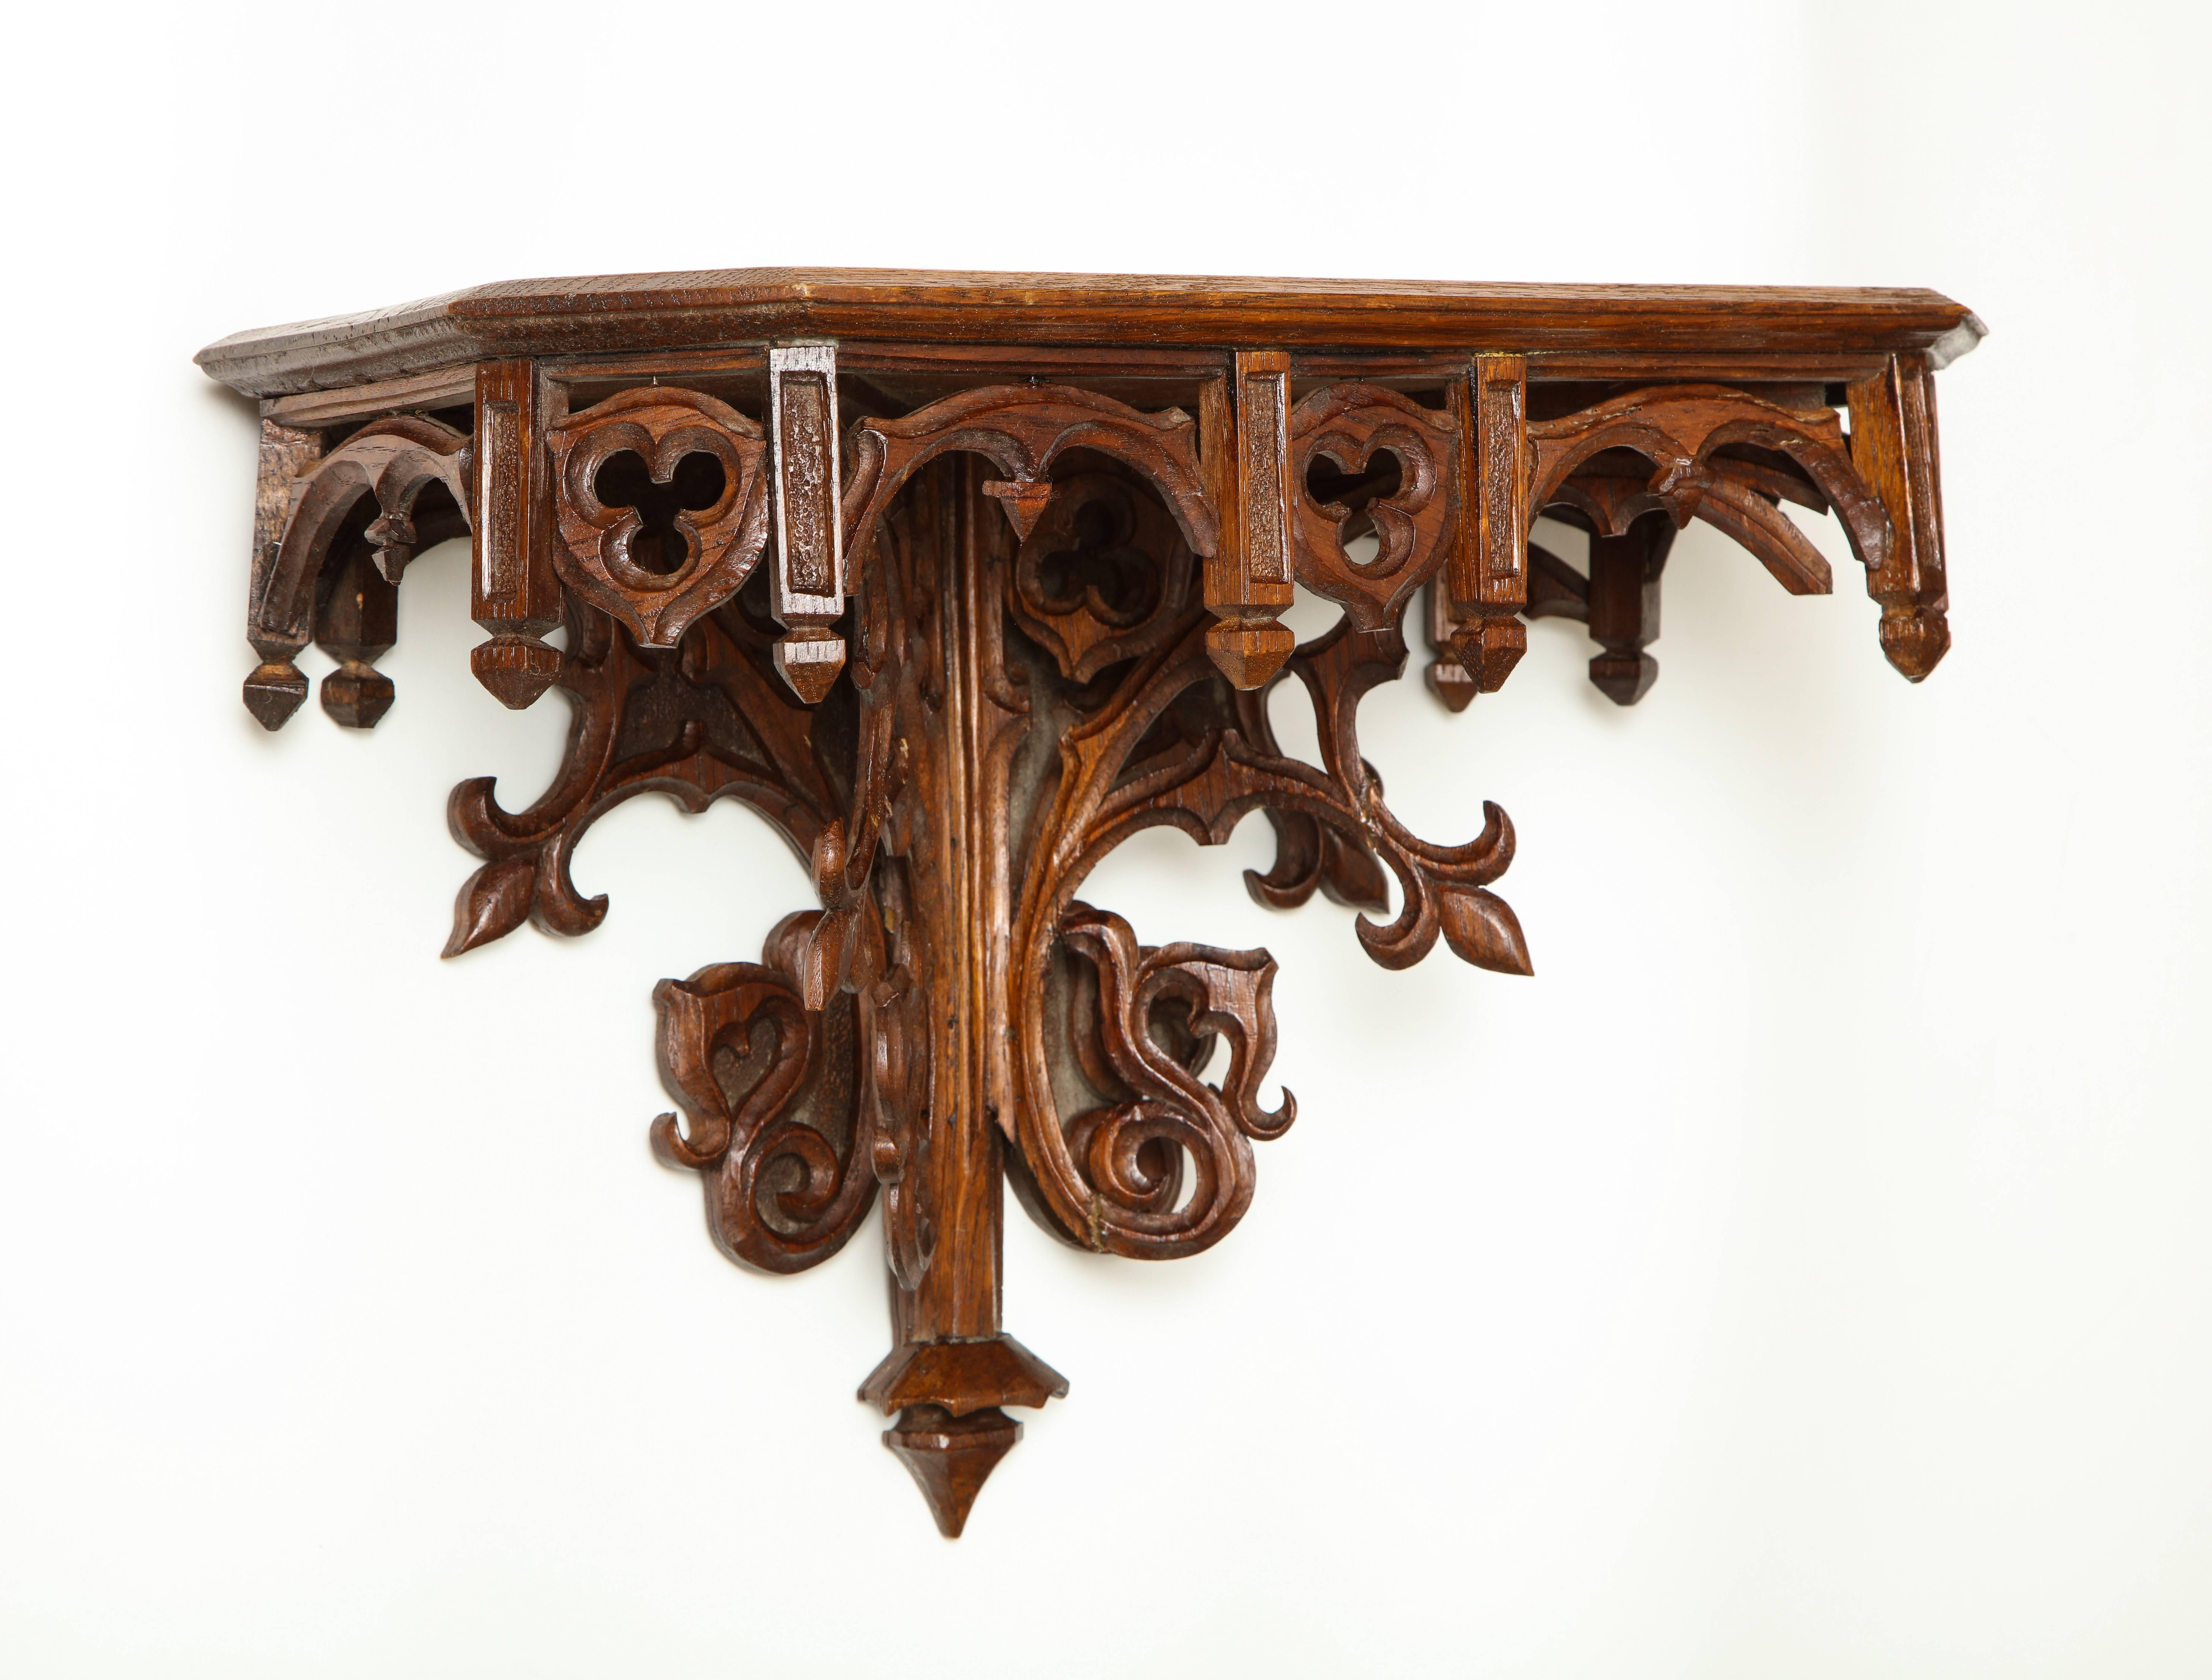 The oak has deepened to a pleasing color; finely carved with tracery decoration.